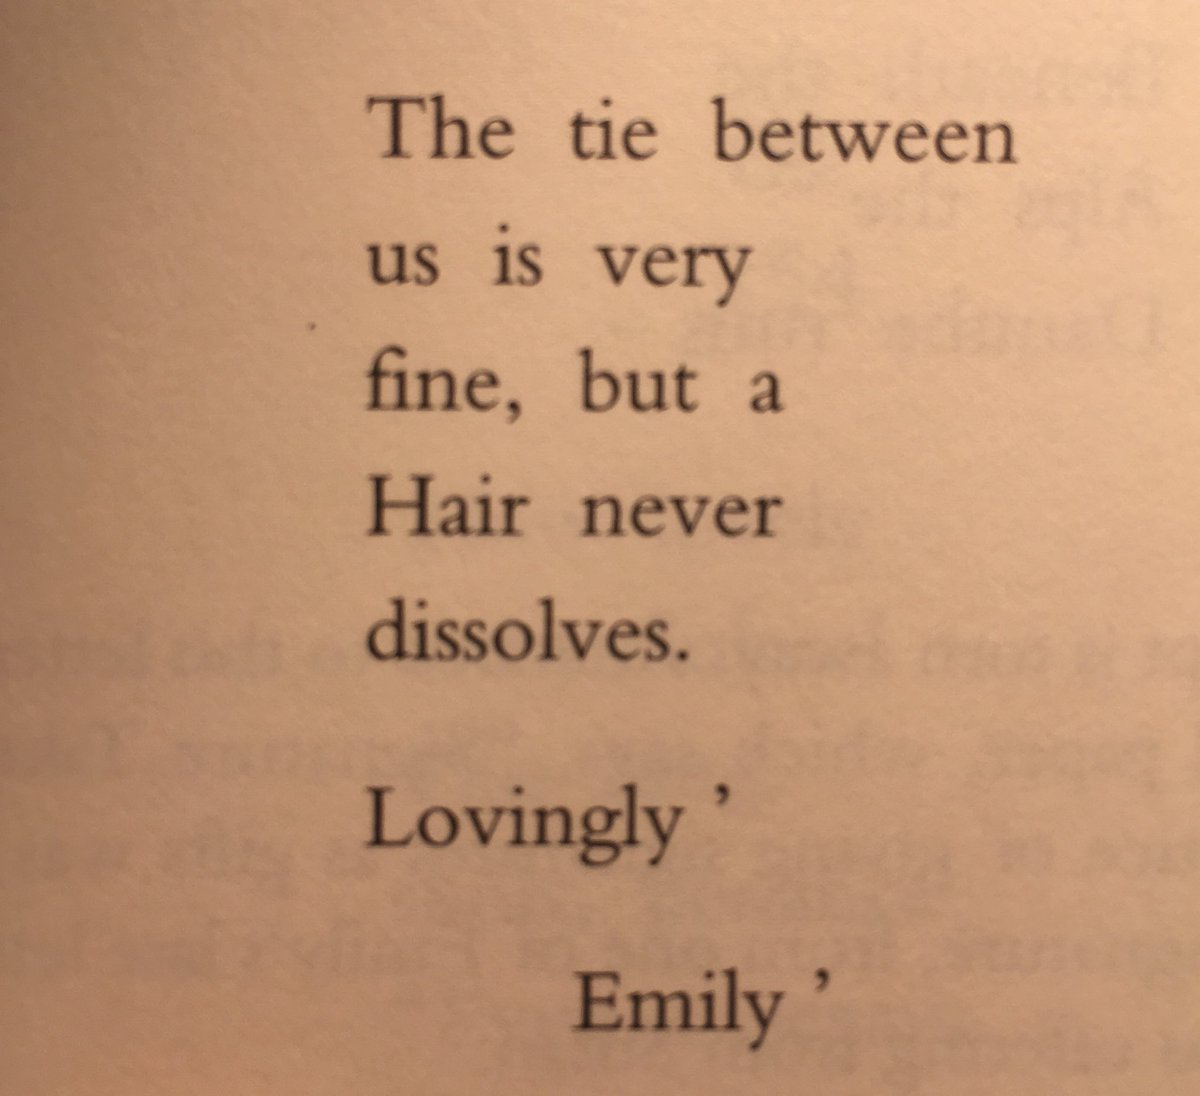 love & its tenuous connections— hairs/wires/strings 1. emily dickinson to sue gilbert, 1885 2. anne sexton, “small wire,” 1975 3. roland barthes, a lover’s discourse, 1978